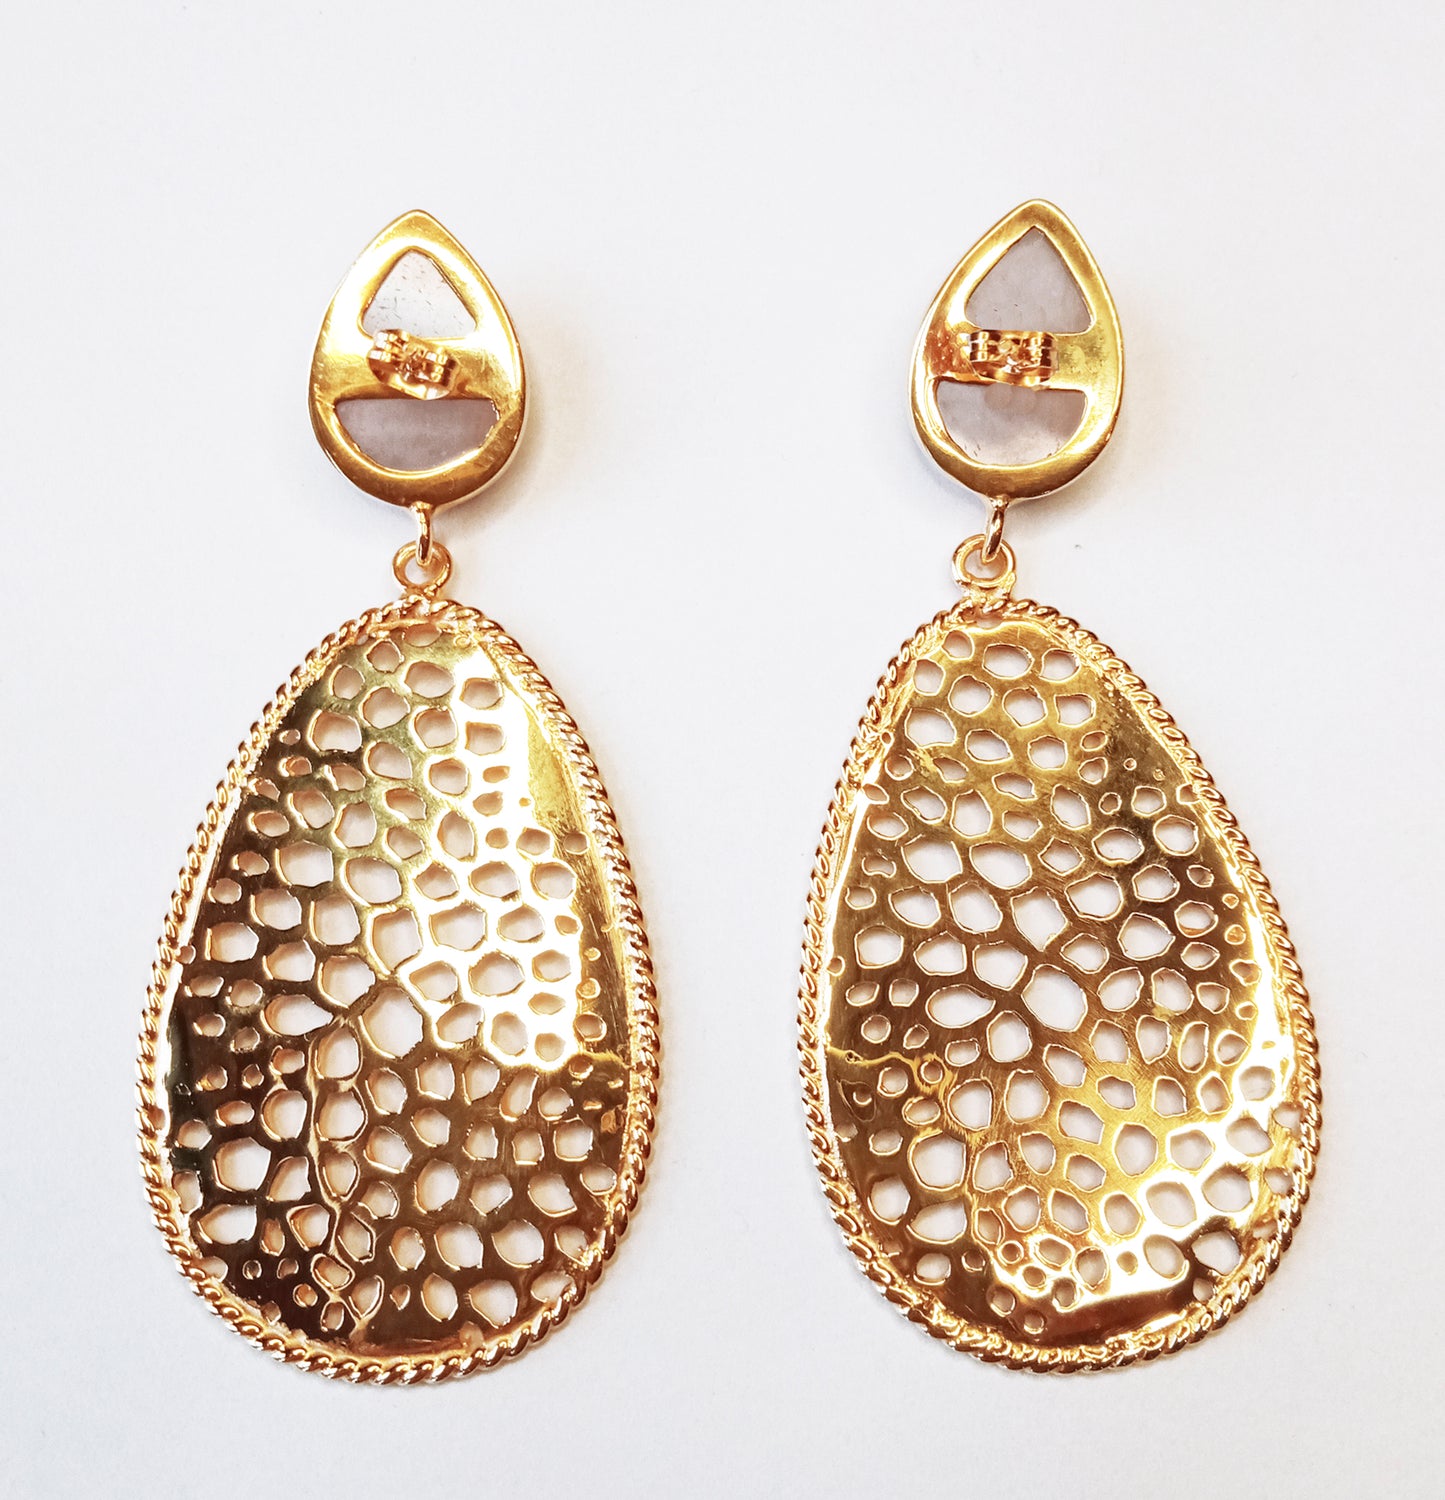 Labyrinth Teardrop Earrings with Rose Quartz Gemstone And 18kt Gold Plate